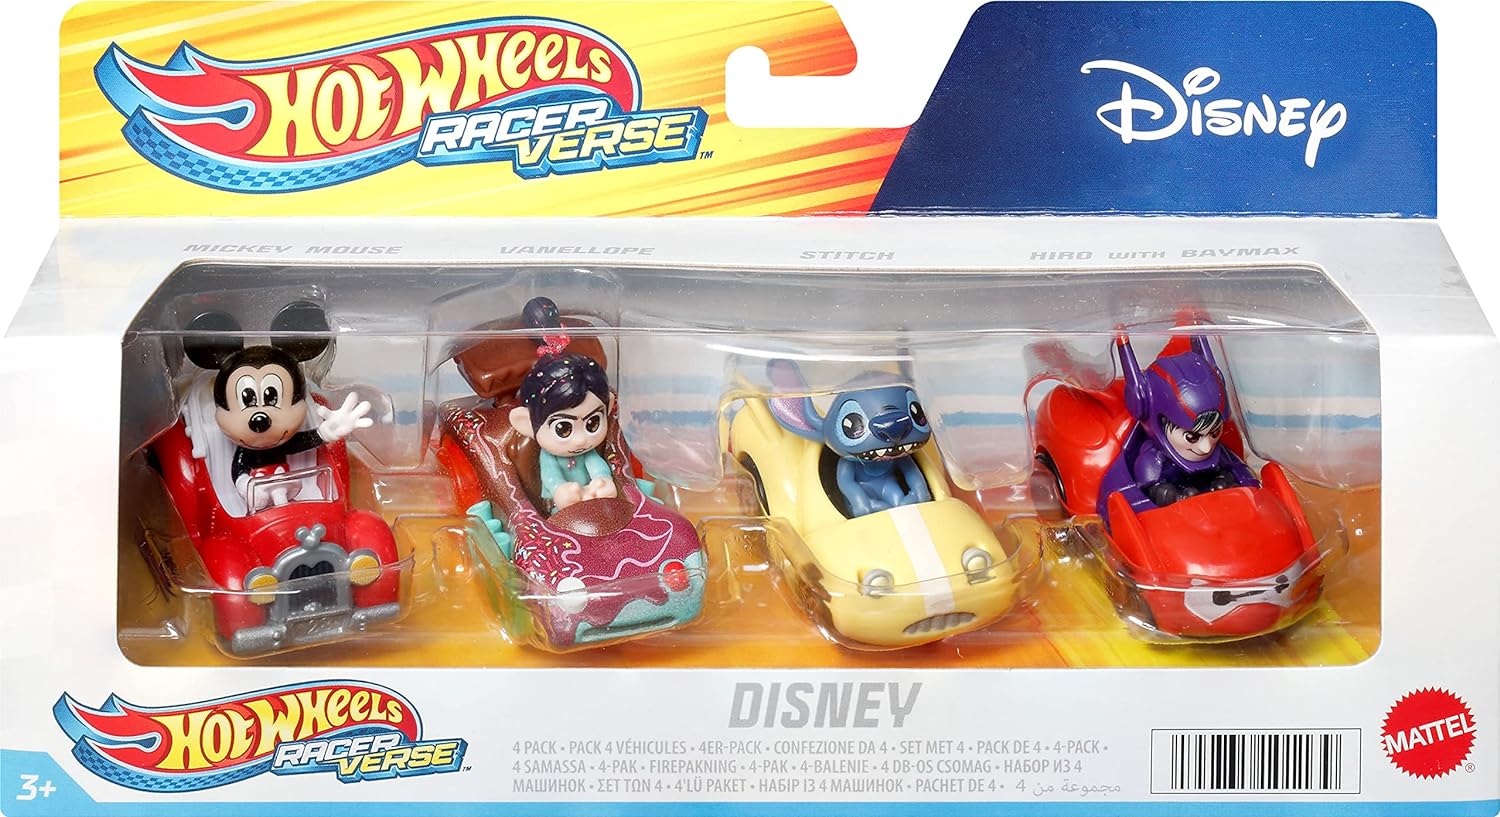 Hot Wheels RacerVerse, 4 Pack Disney Metal Toy Cars optimized for use on Hot Wheels tracks, featuring popular Disney Characters